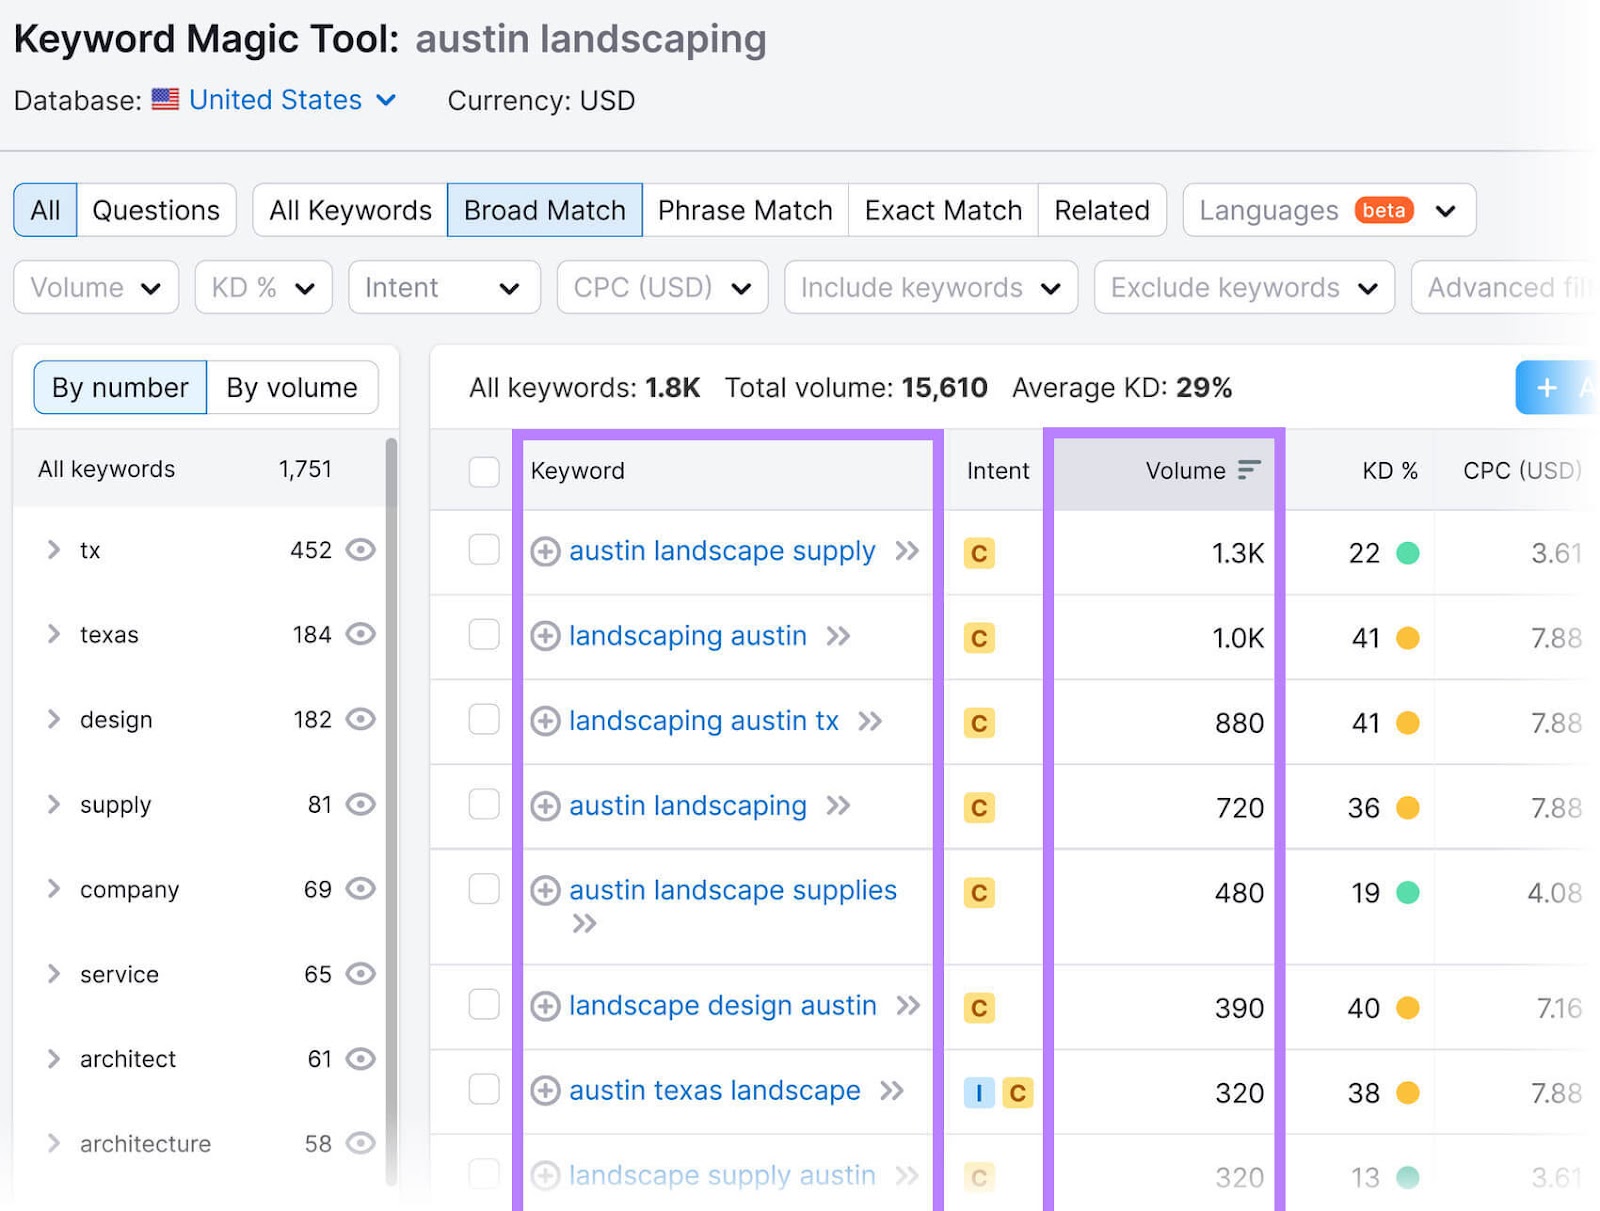 Keyword Magic Tool results for "austin landscaping"